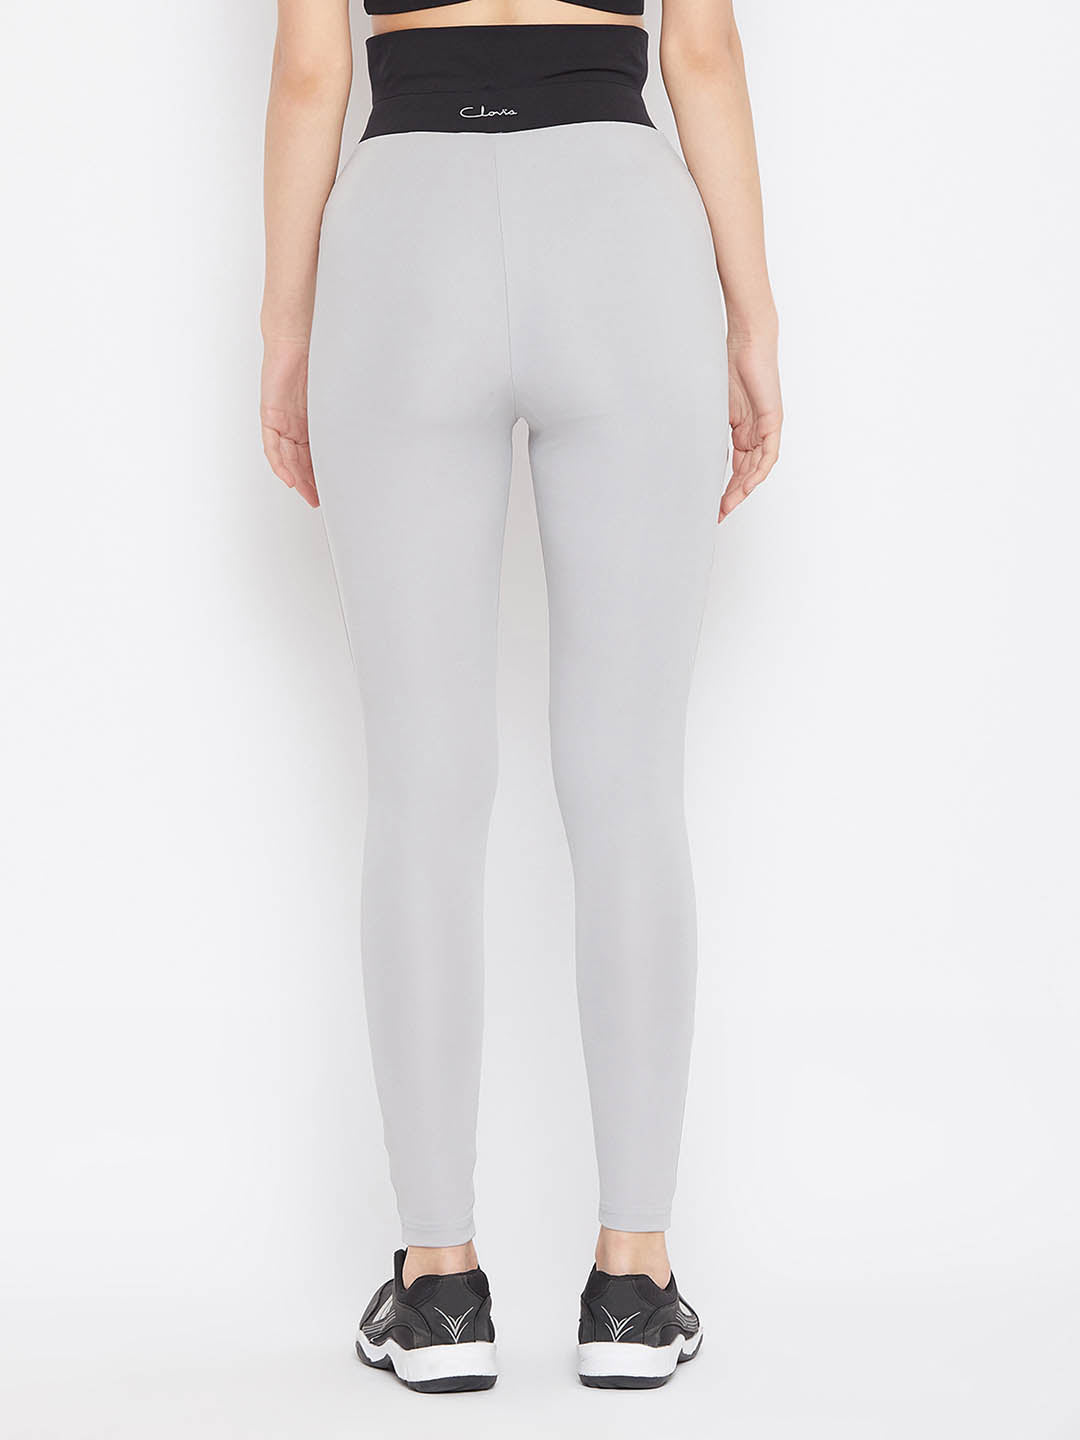 Activewear Ankle Length Tights In Grey